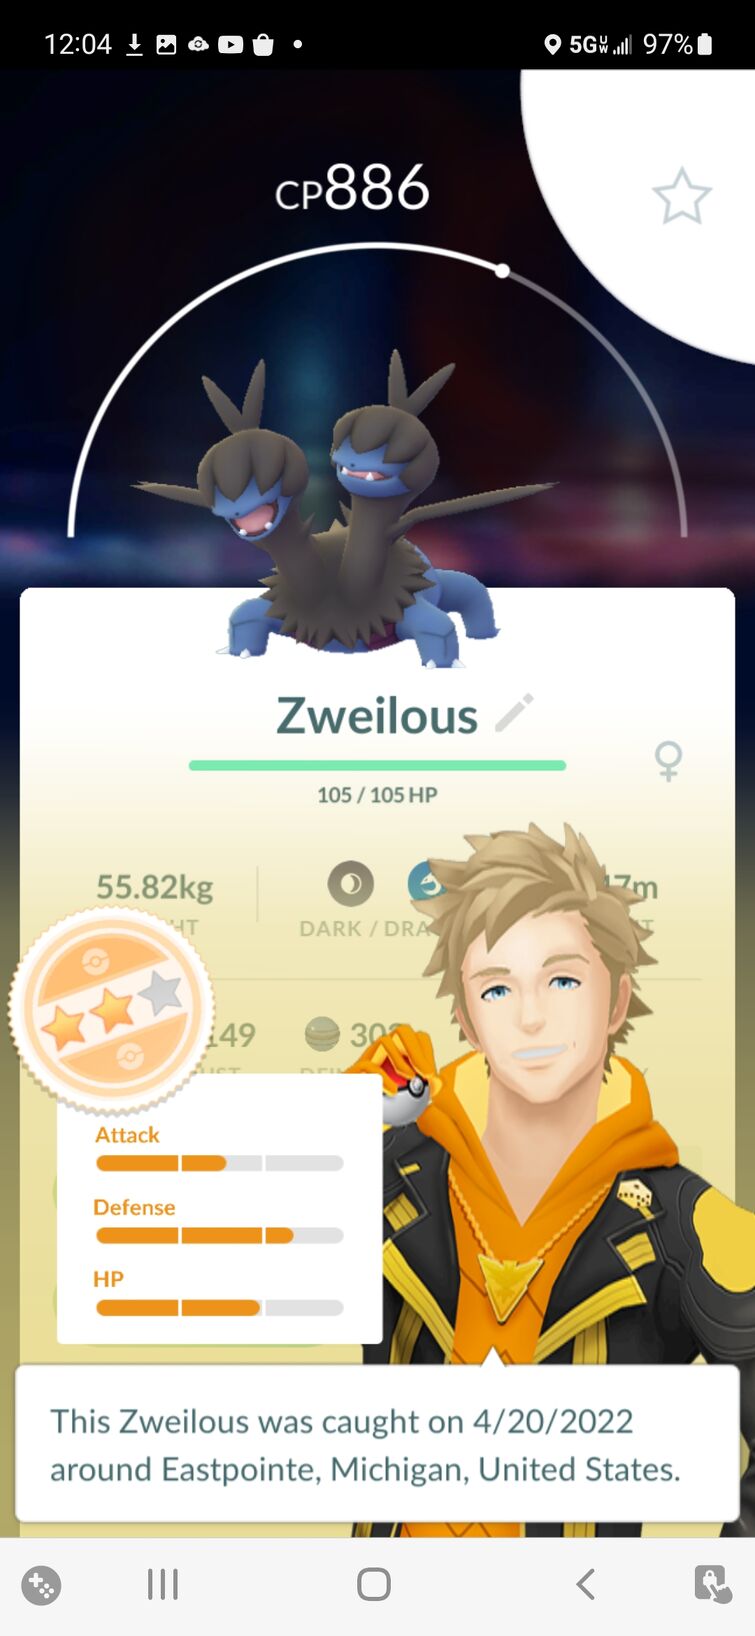 Should I evolve this Zweilous? Or wait to find a better Deino? : r/pokemongo